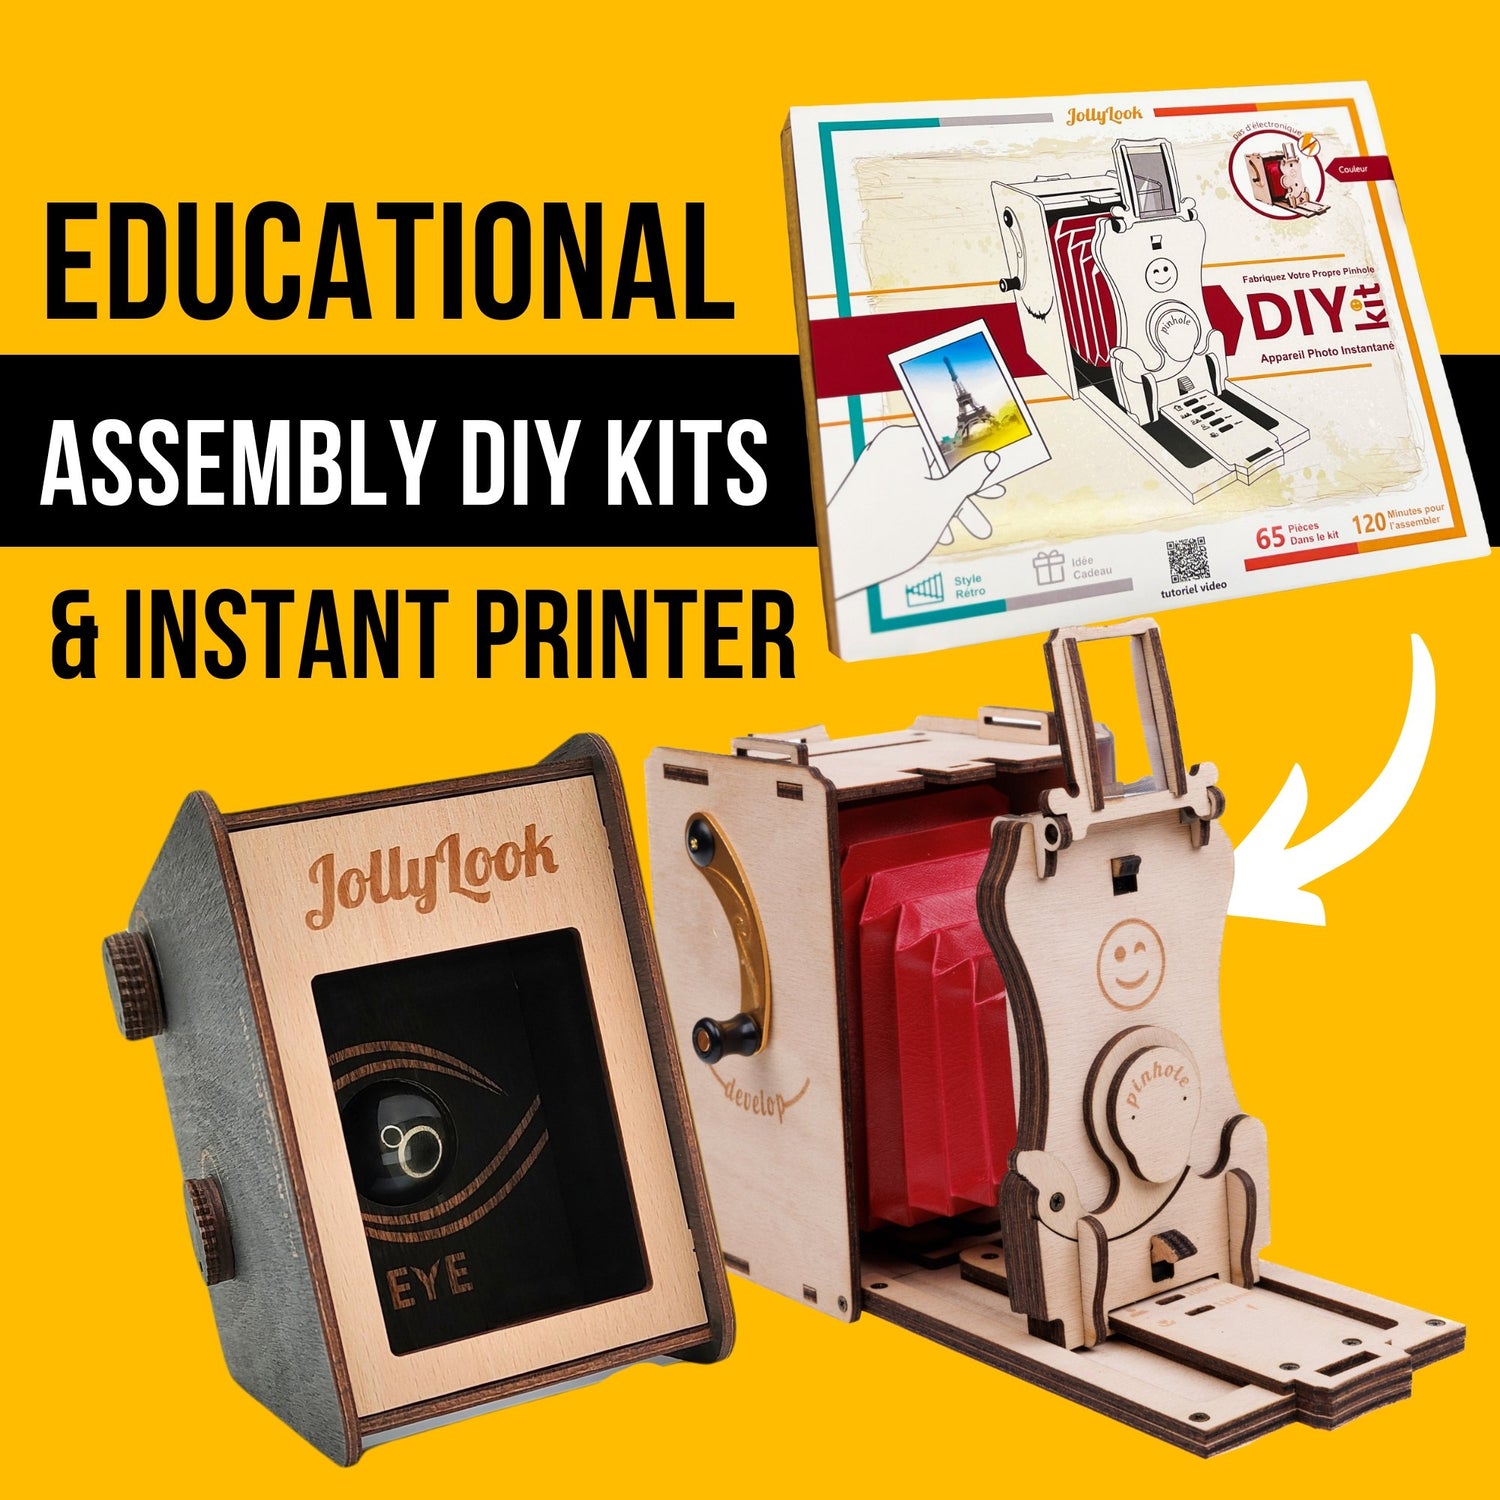 Jollylook DIY Kits for Self-Assembly, Instant Pinhole Cameras and Instant Printers